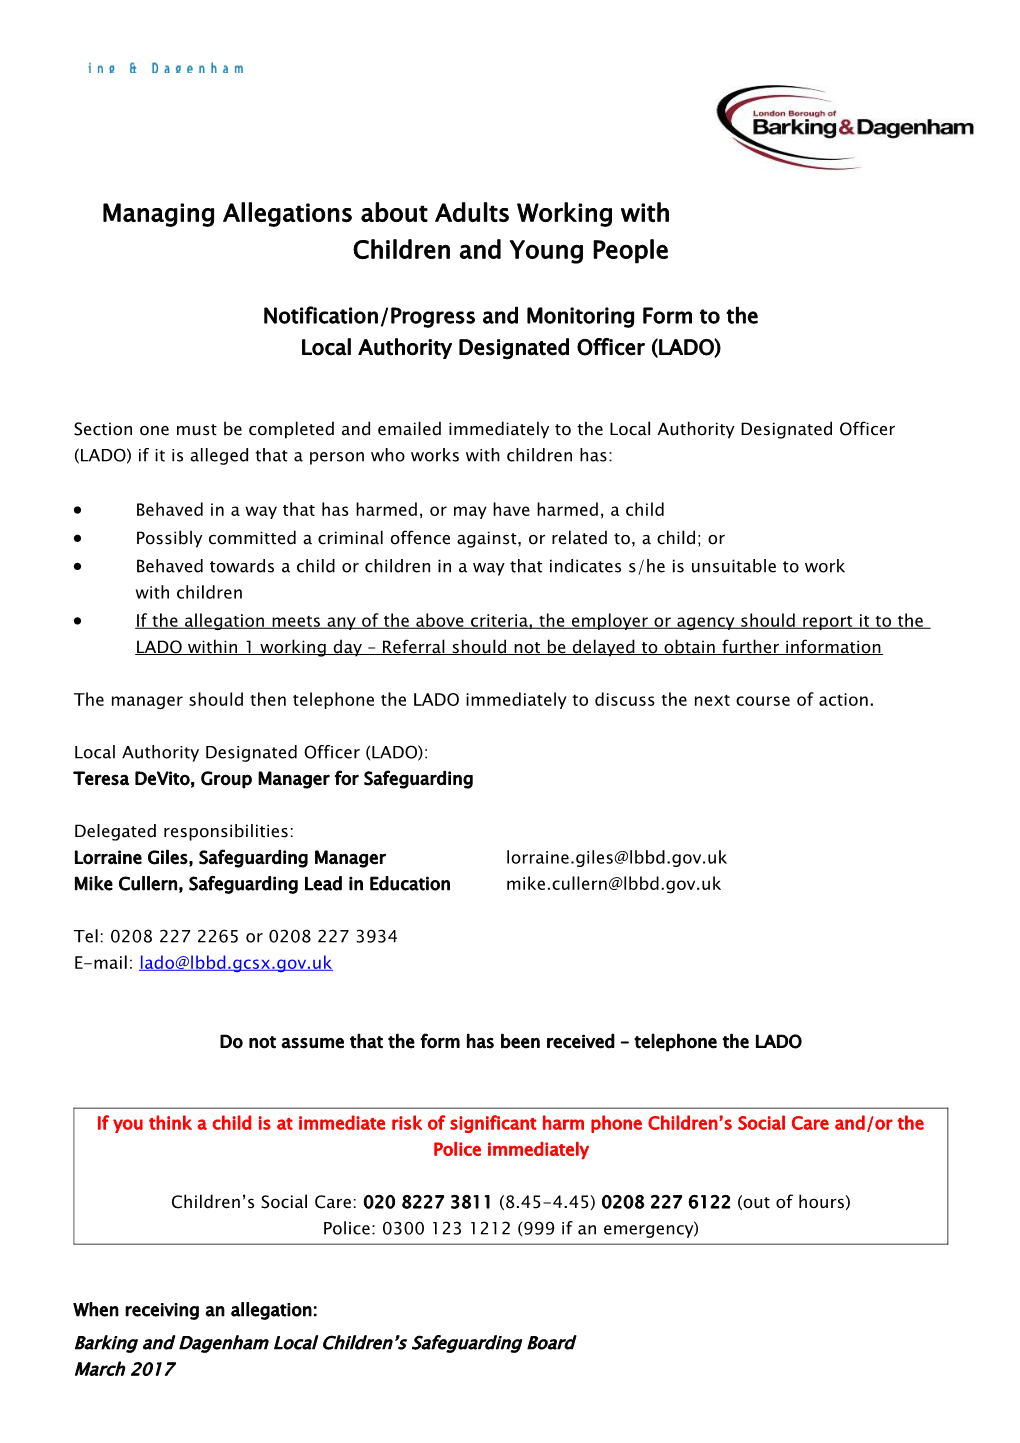 Managing Allegations About Adults Working with Children & Young People